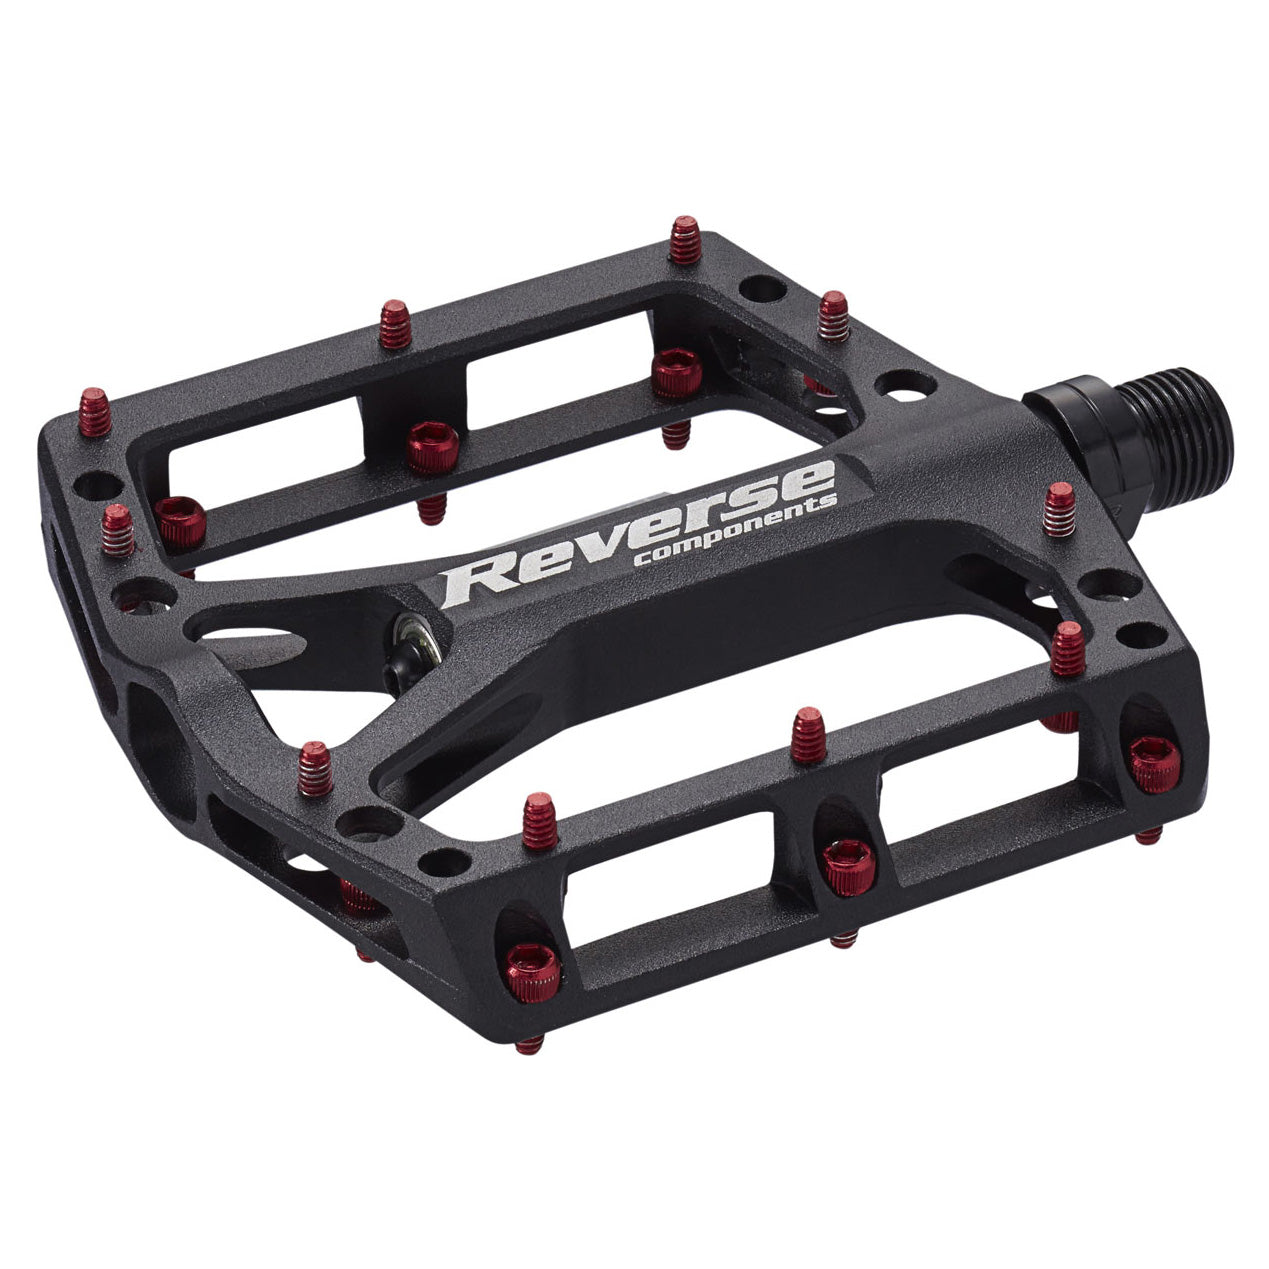 Reverse Black One Pedals Black/Red